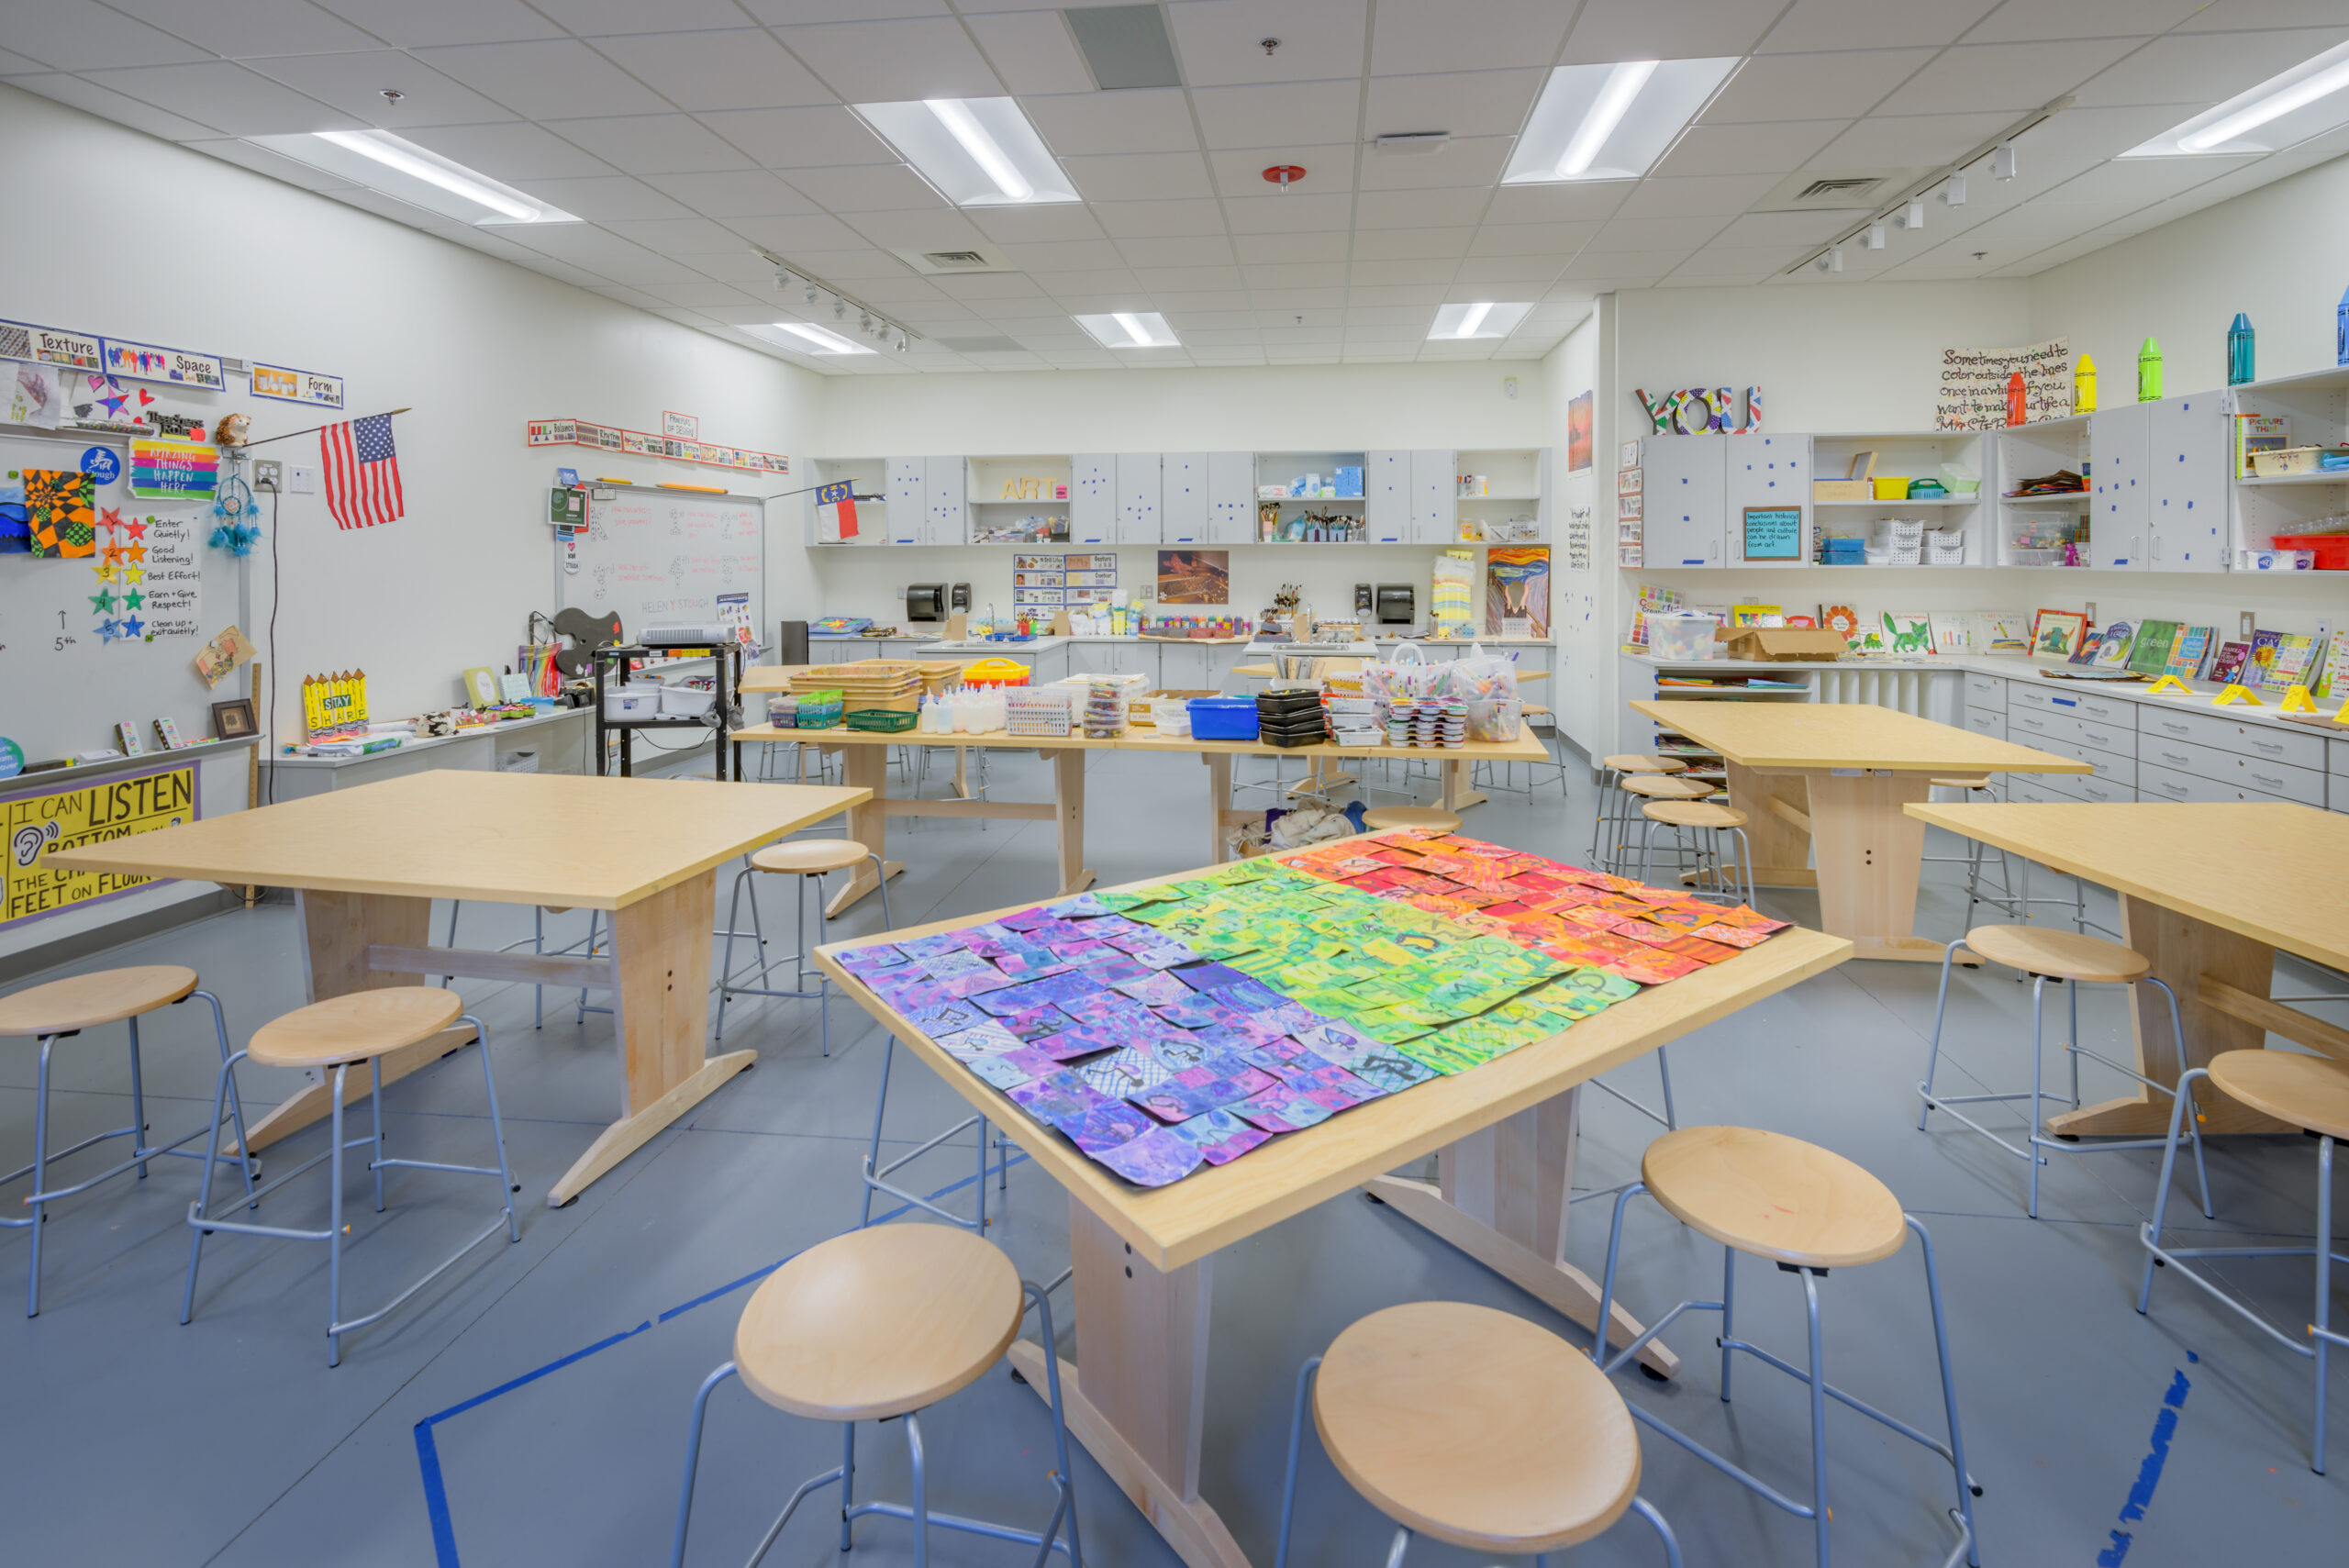 Barton Pond Elementary School Art Room with Colorful Craft Materials